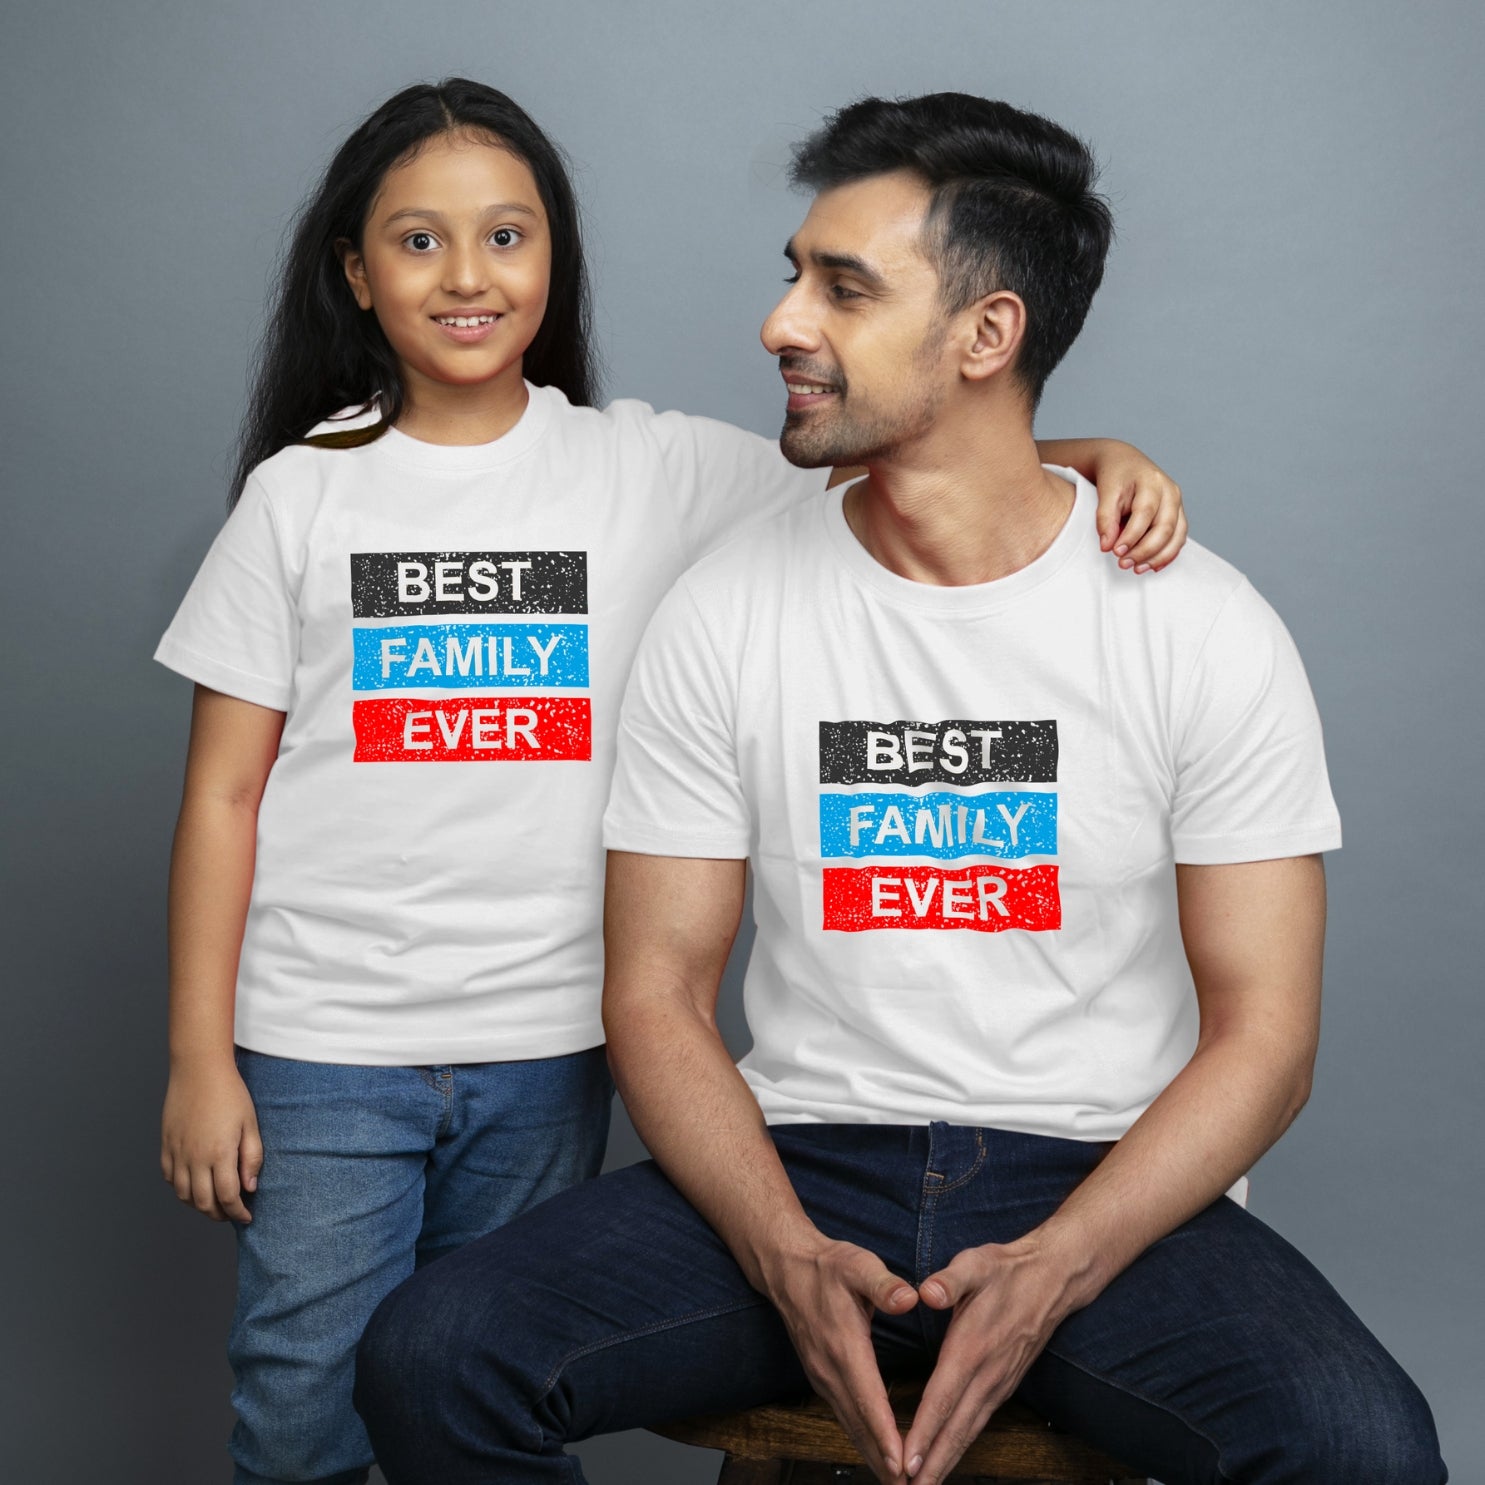 Family of 2 t shirt for Dad Daughter in White Colour- Best Family Ever Variant